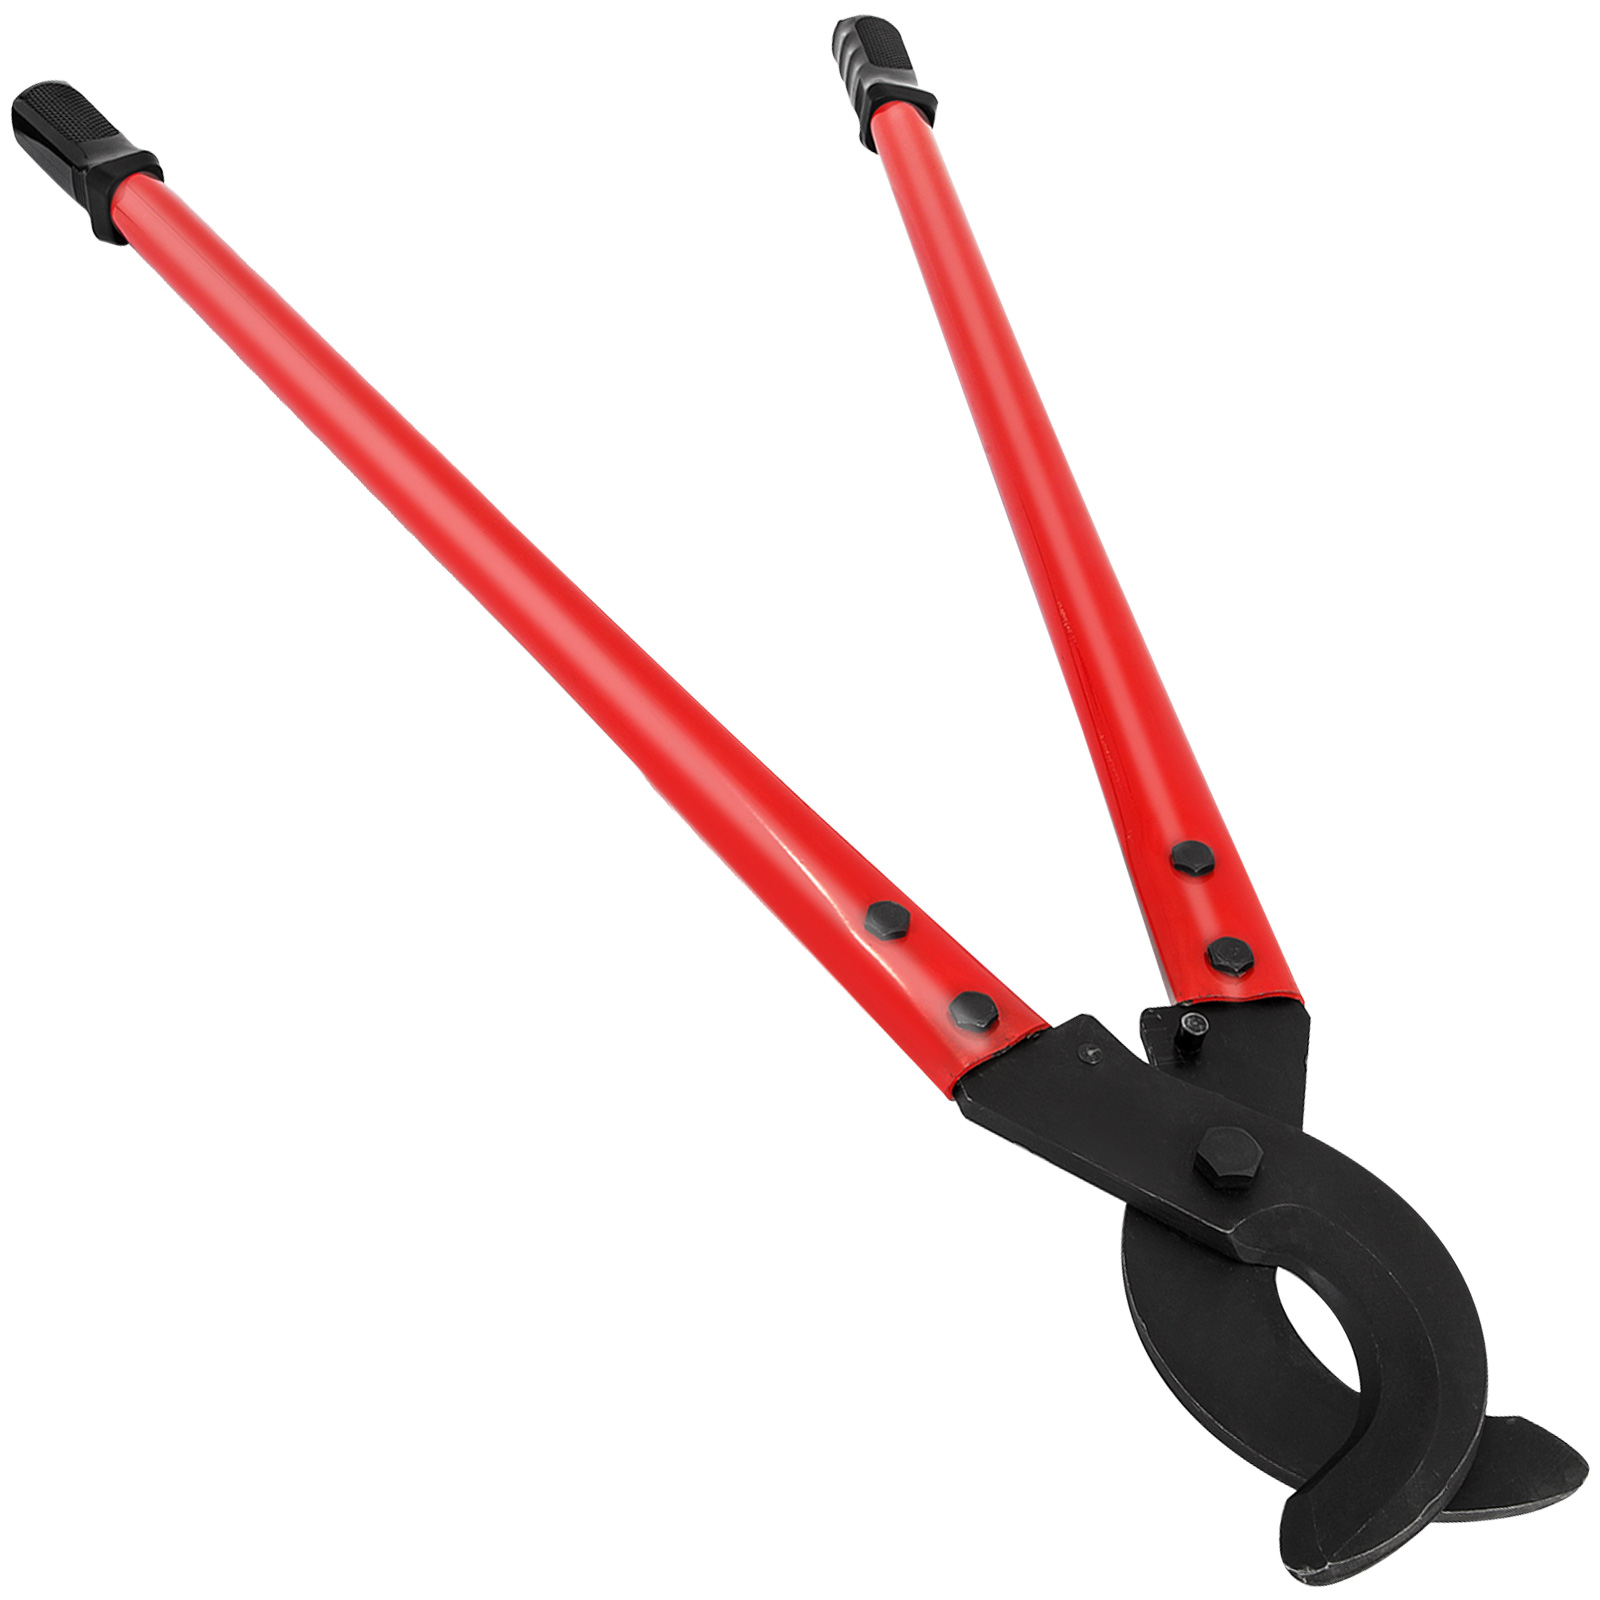 18" 450 mm Cable Cutter Wire Cutter Electrical Copper Aluminum Cable Cutter Tool 